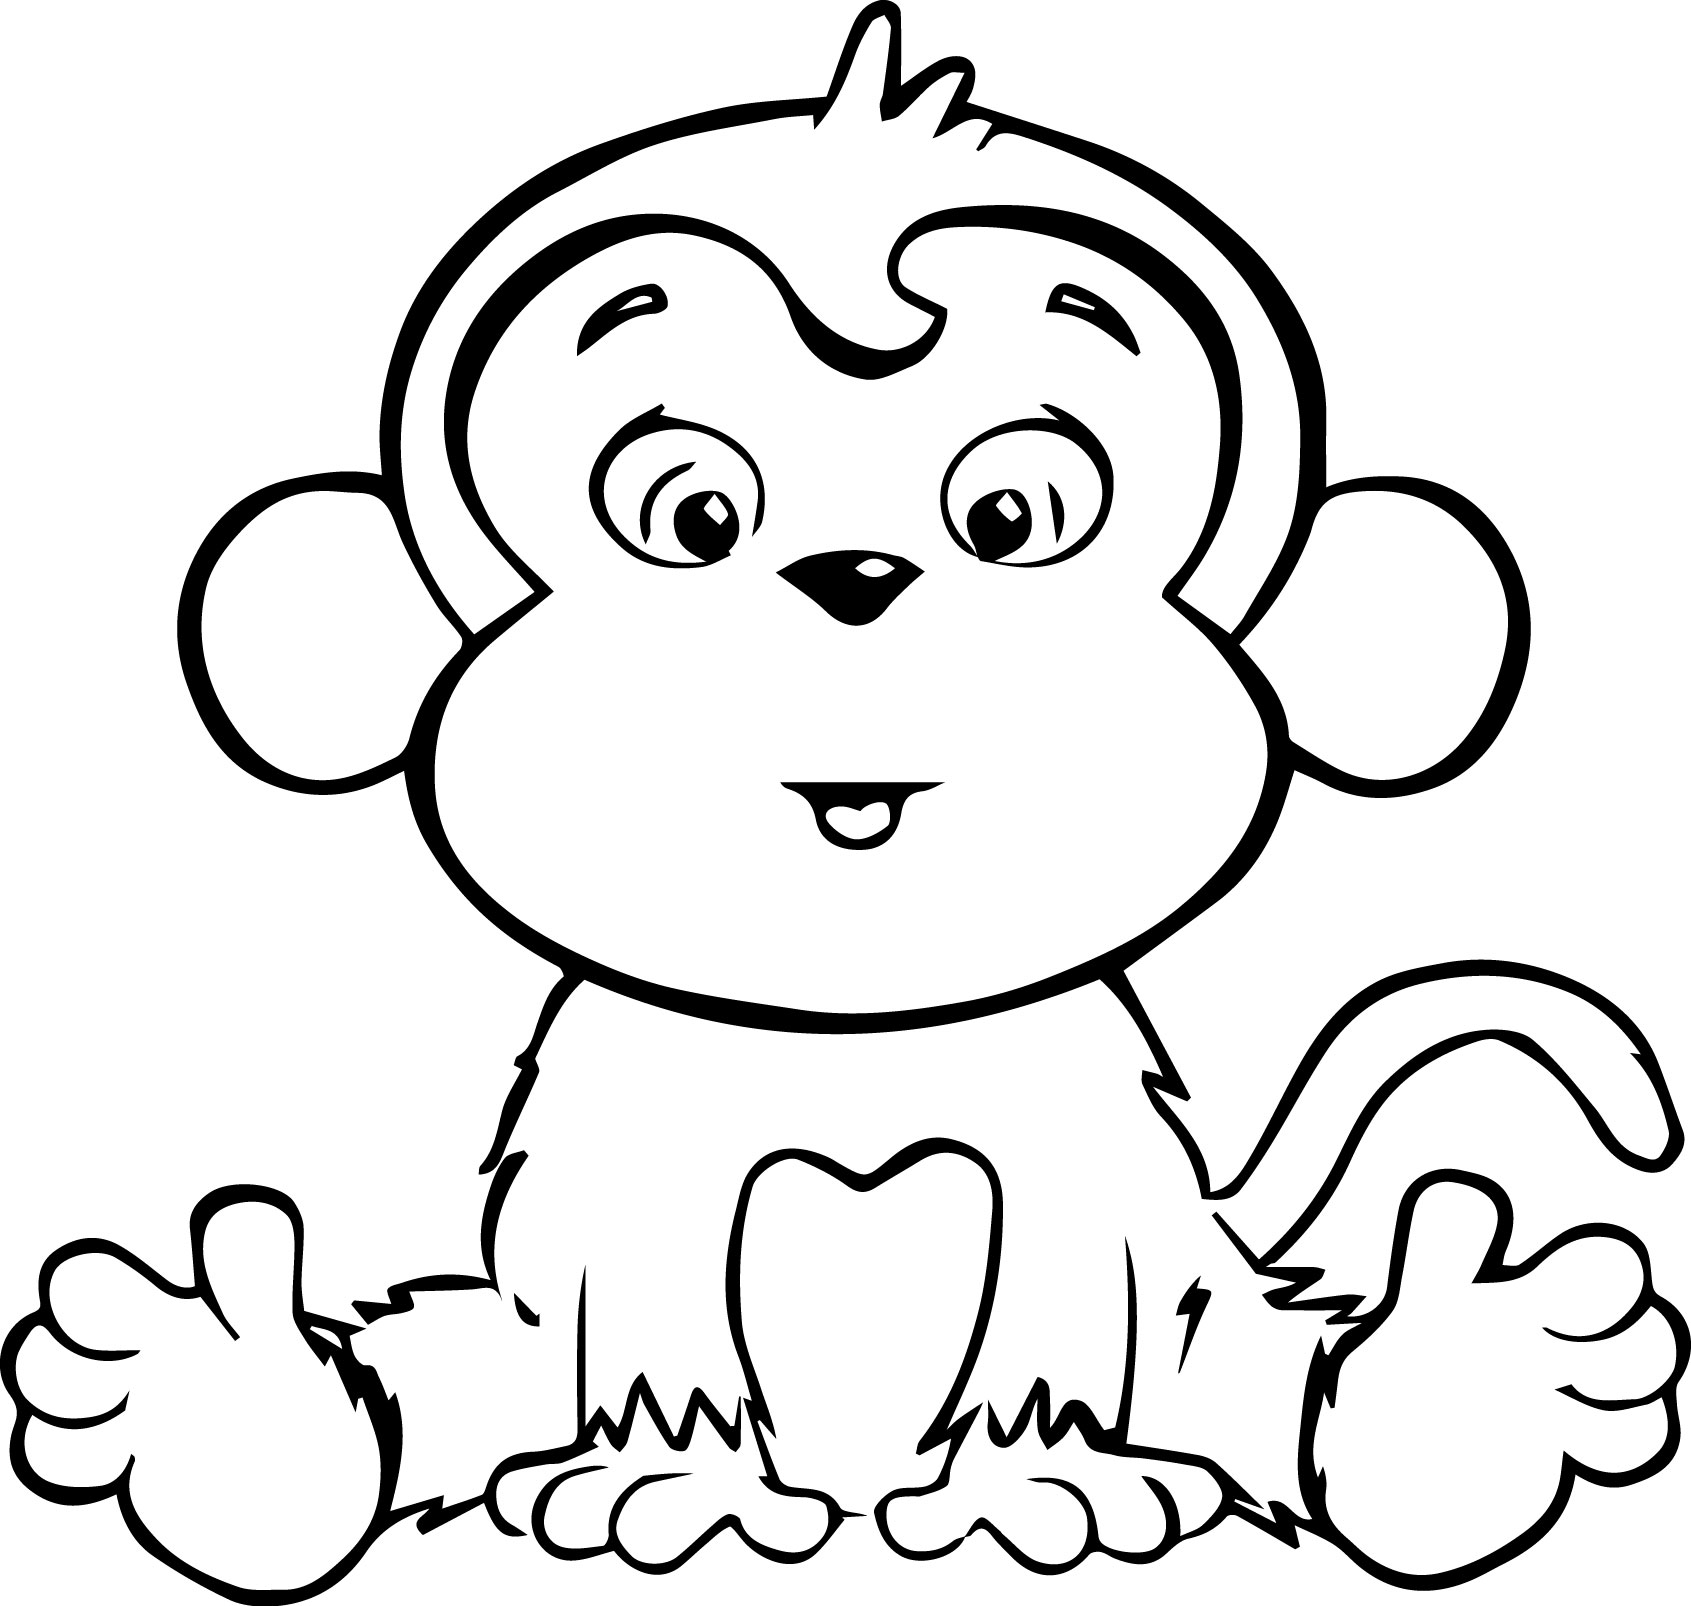 1691x1606 Cartoon coloring pages monkey